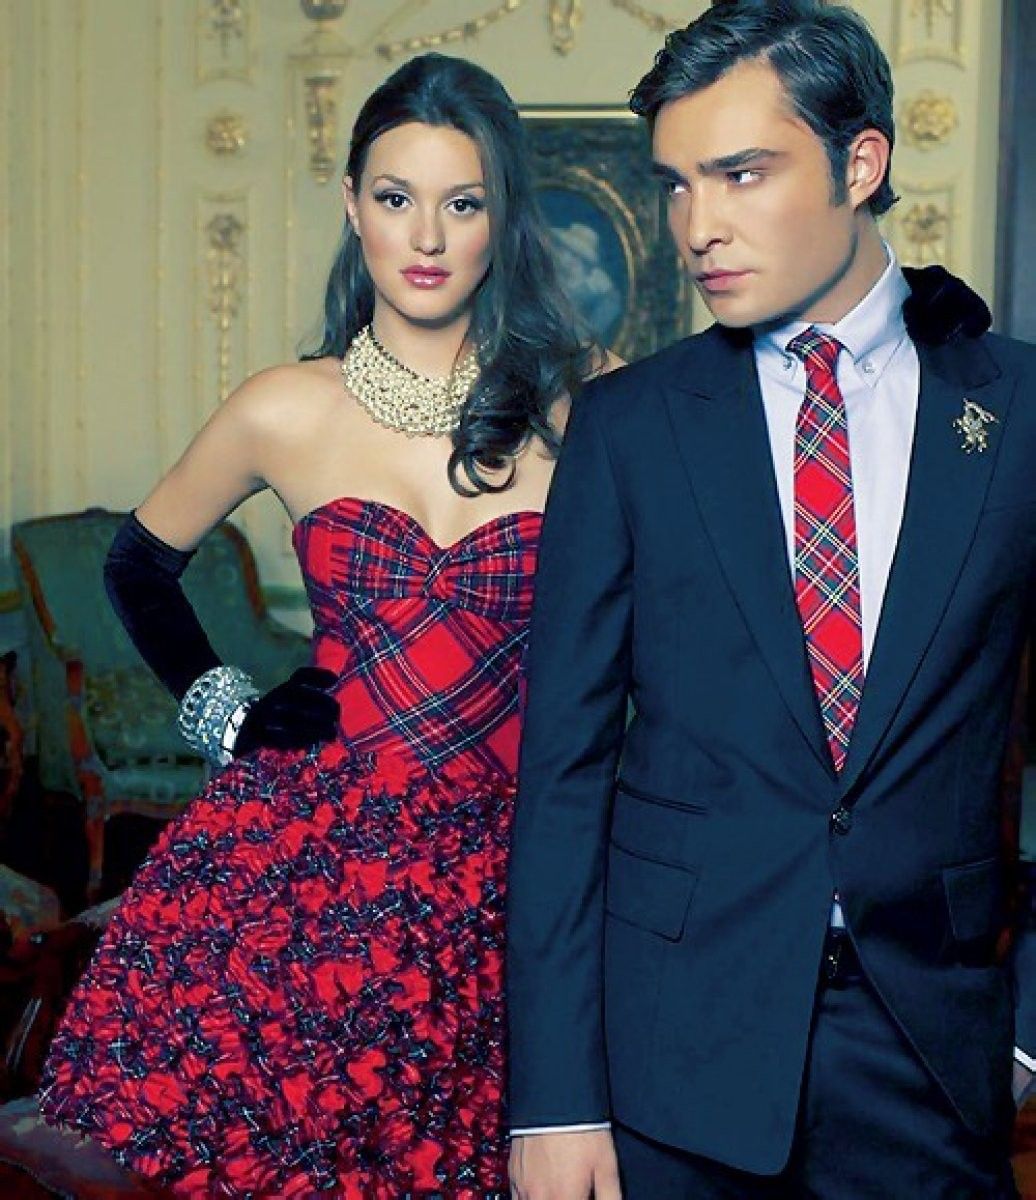 Outfits-For-Couples 50+ Stylish Formal Matching Outfits for Couples